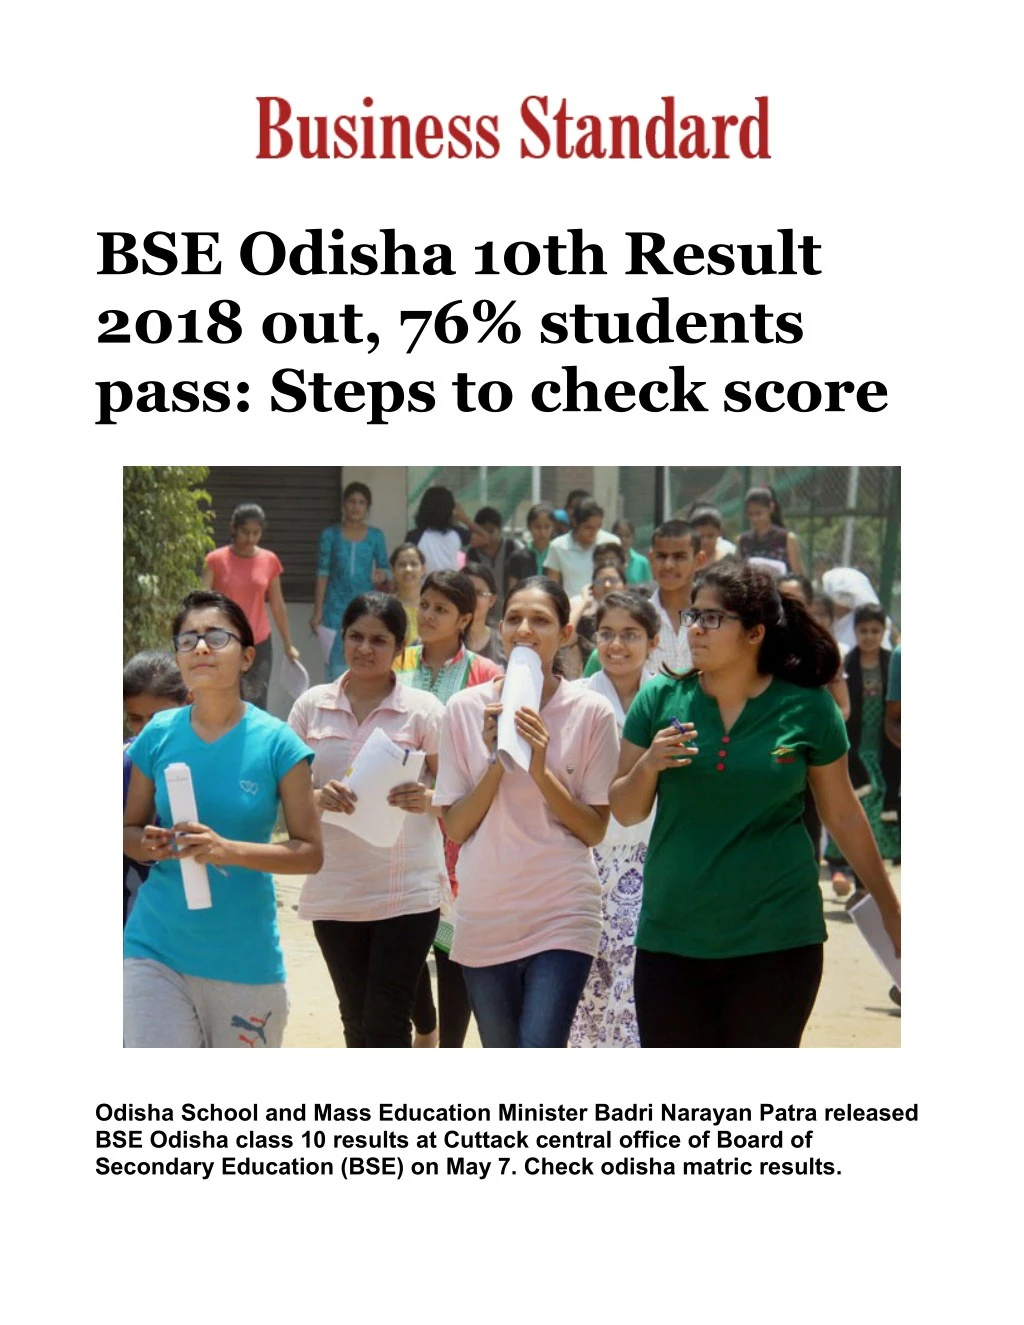 bse odisha 10th result 2018 out 76 students pass